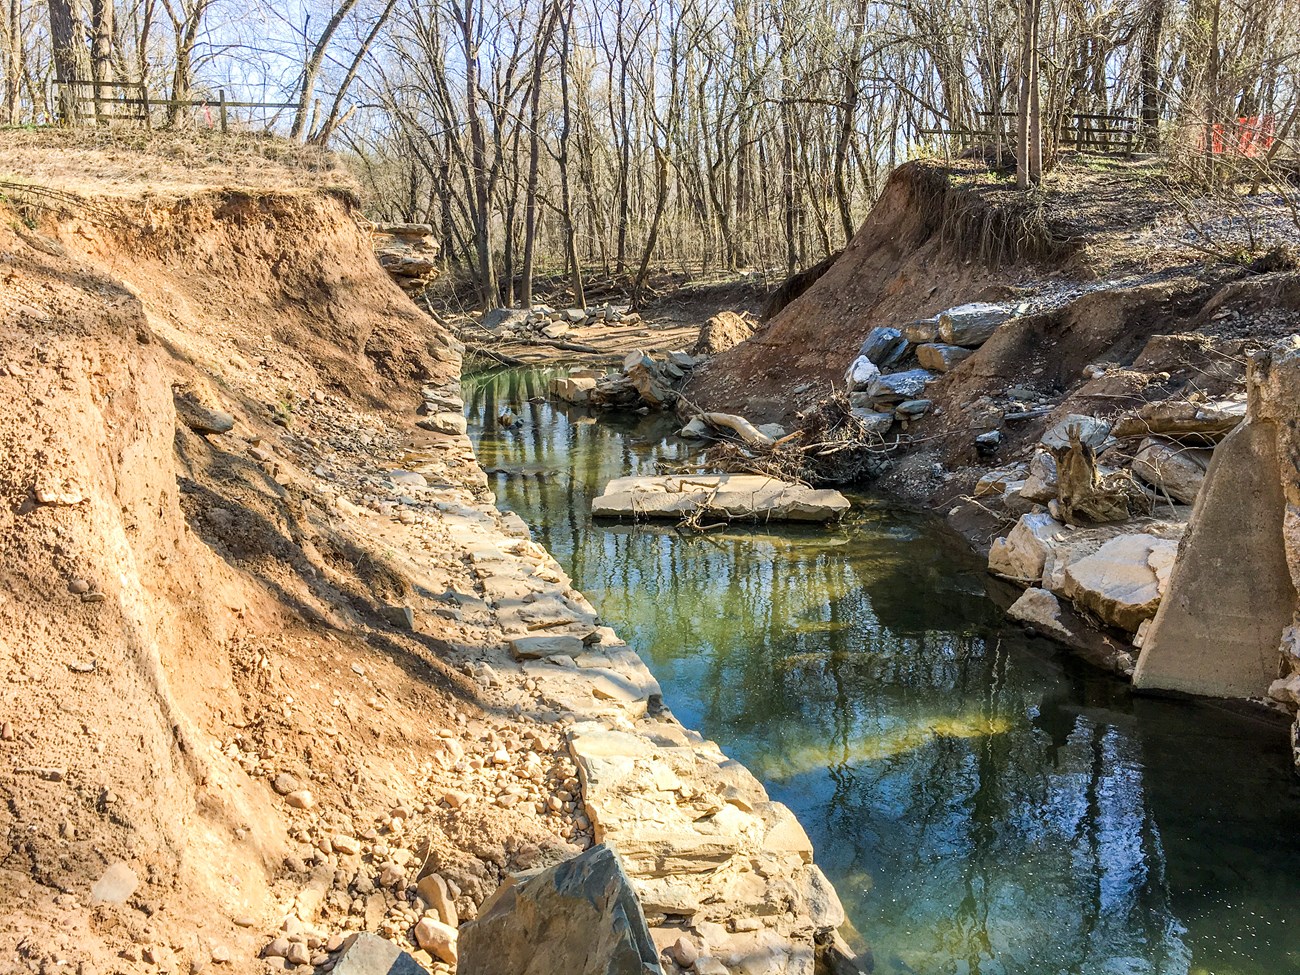 A stream runs through the remnants of a washed out masonry culvert